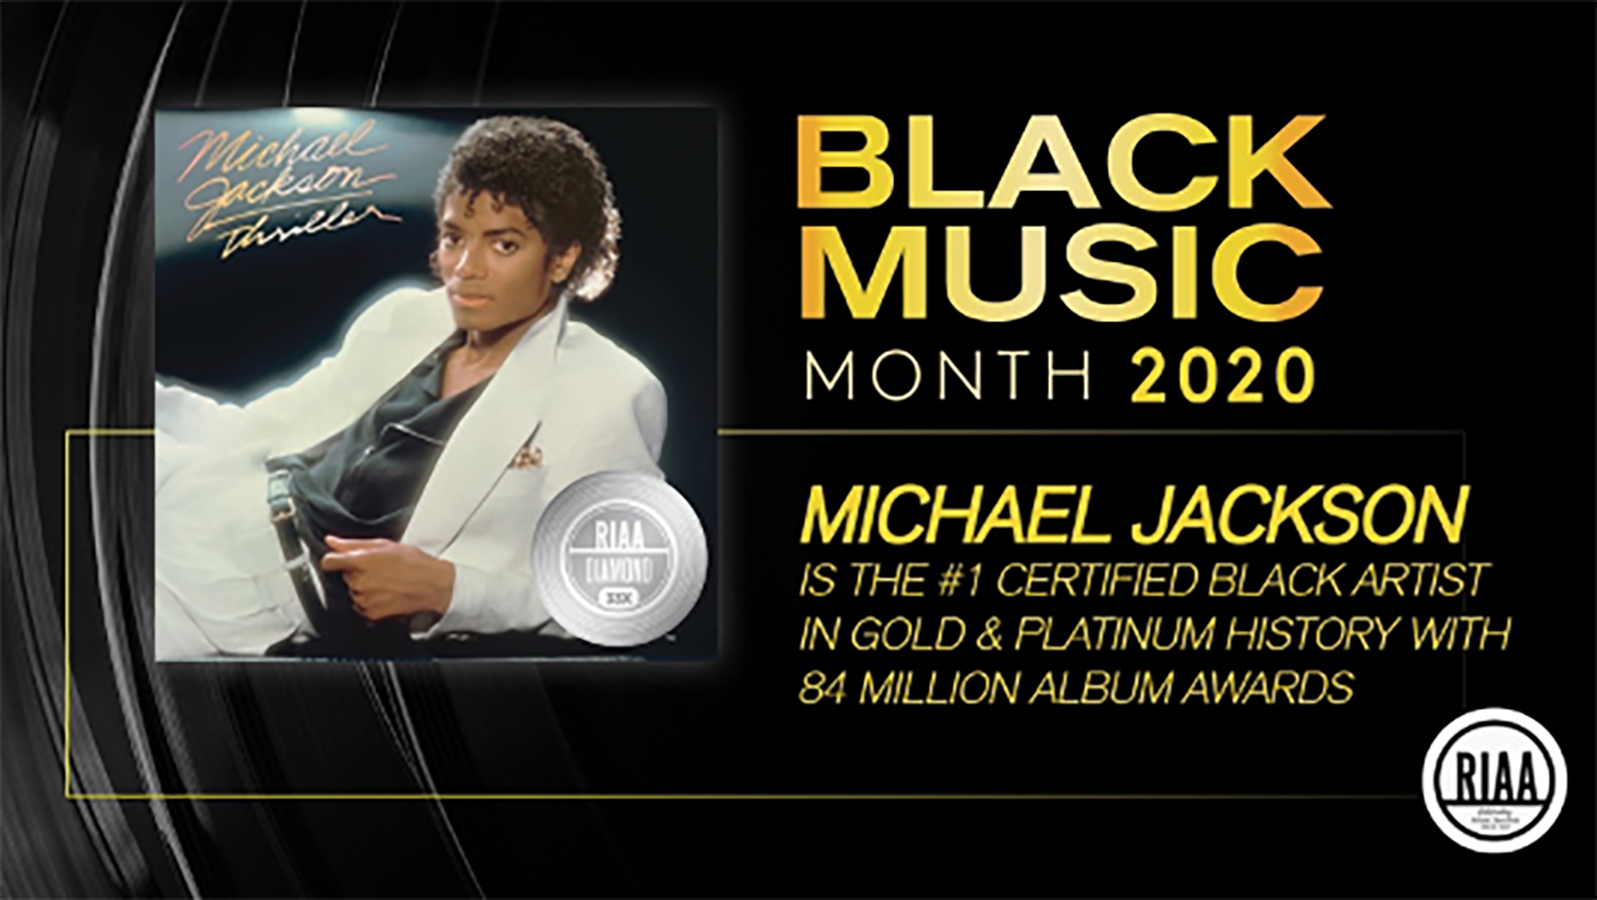 RIAA Announced Michael Jackson Is The #1 Certified Black Artist With The Most Gold & Platinum Sales